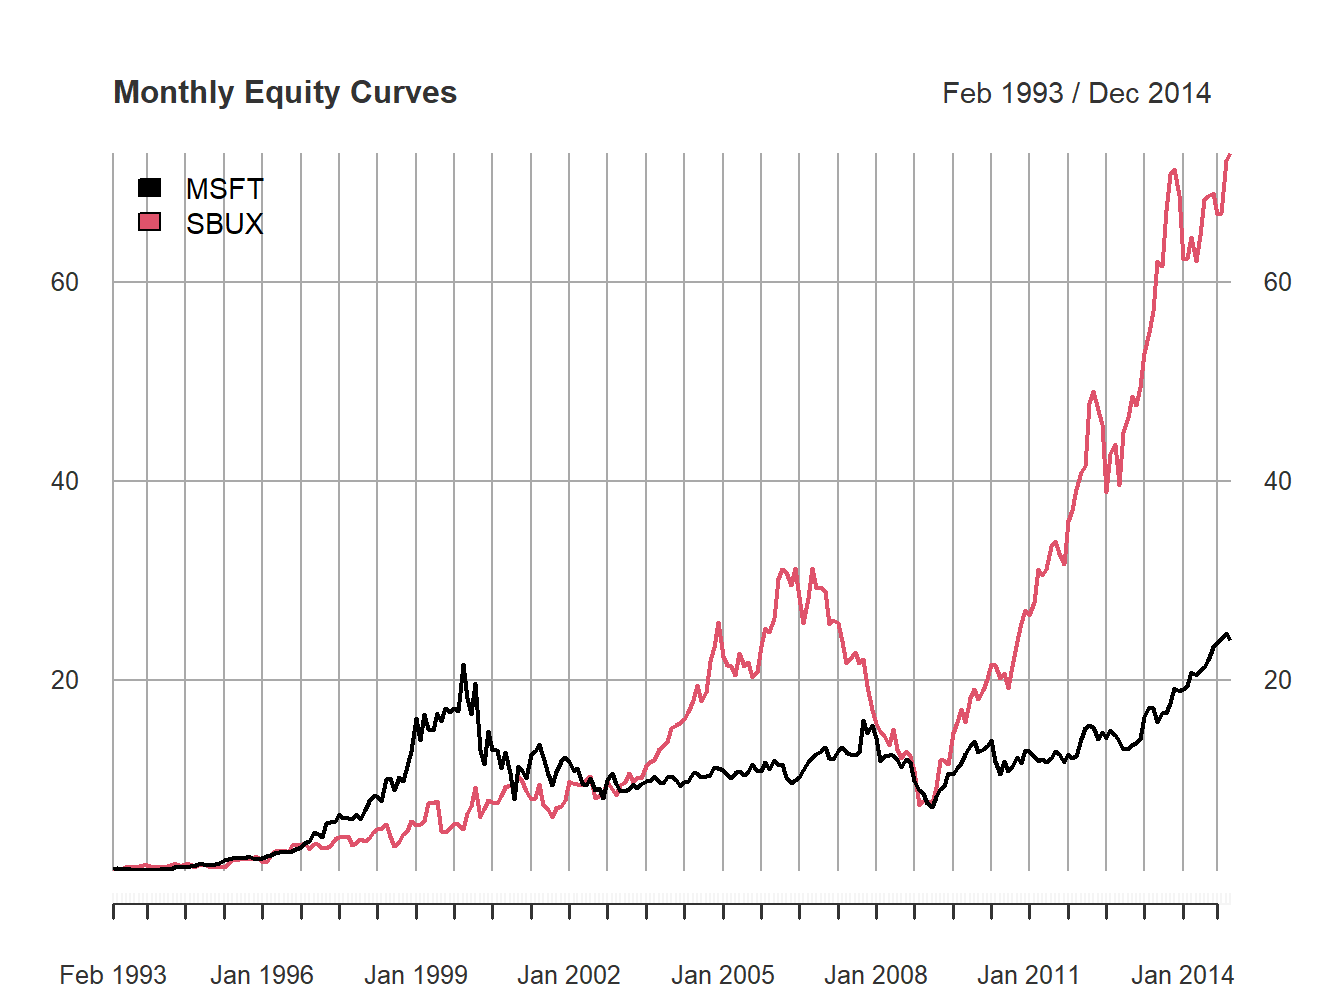 Monthly equity curve for  Microsoft and Starbucks.